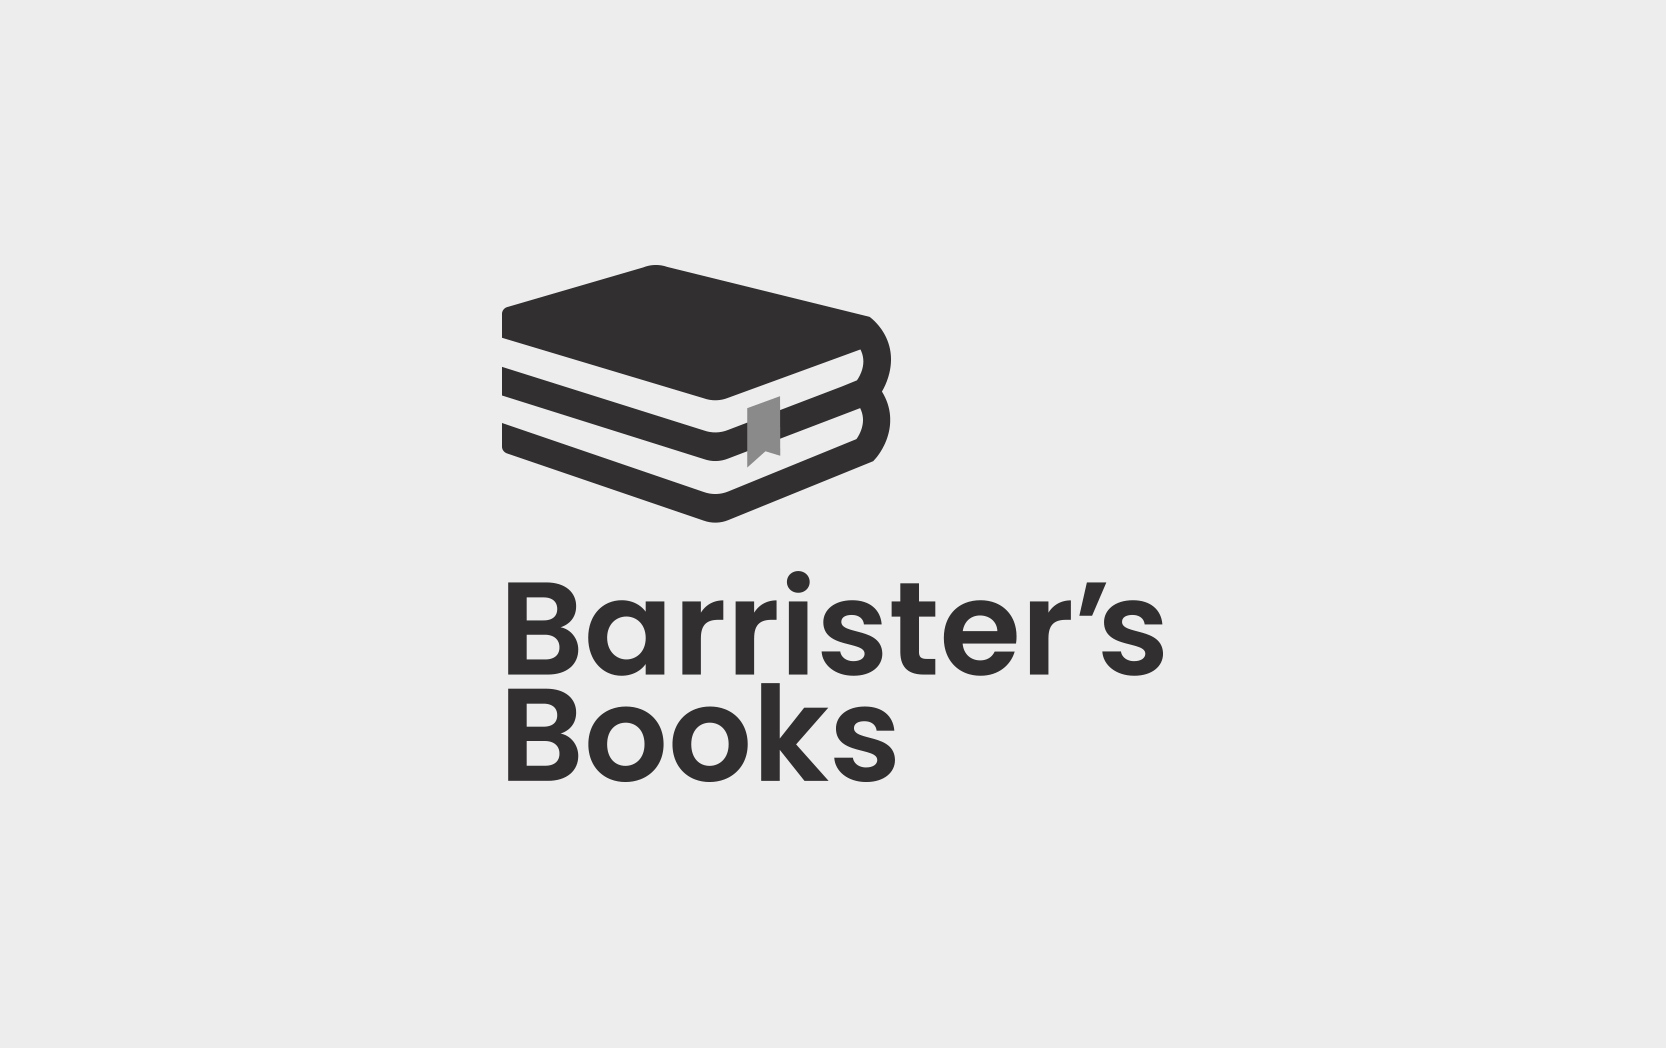 Barrister's Books